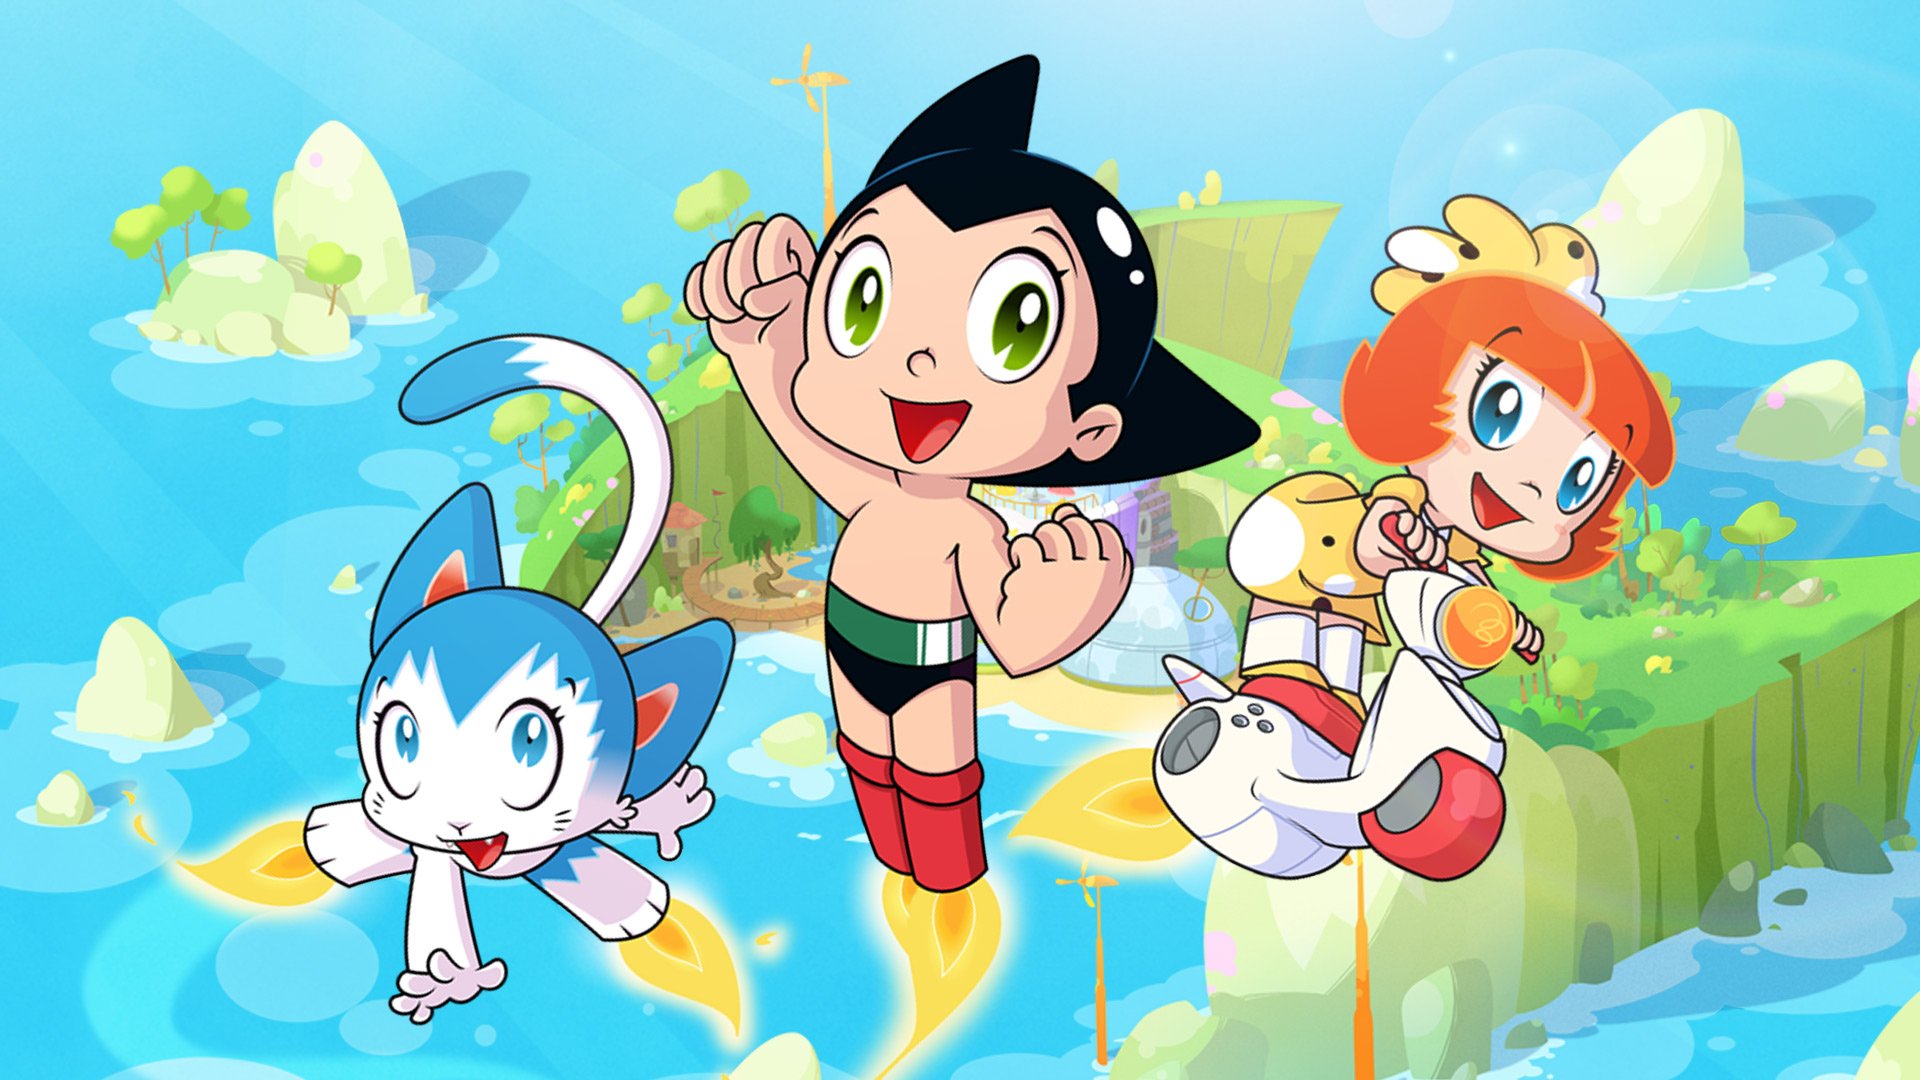 Astro Boy's Abysmal Opening, And Imagi's Sinking Ship